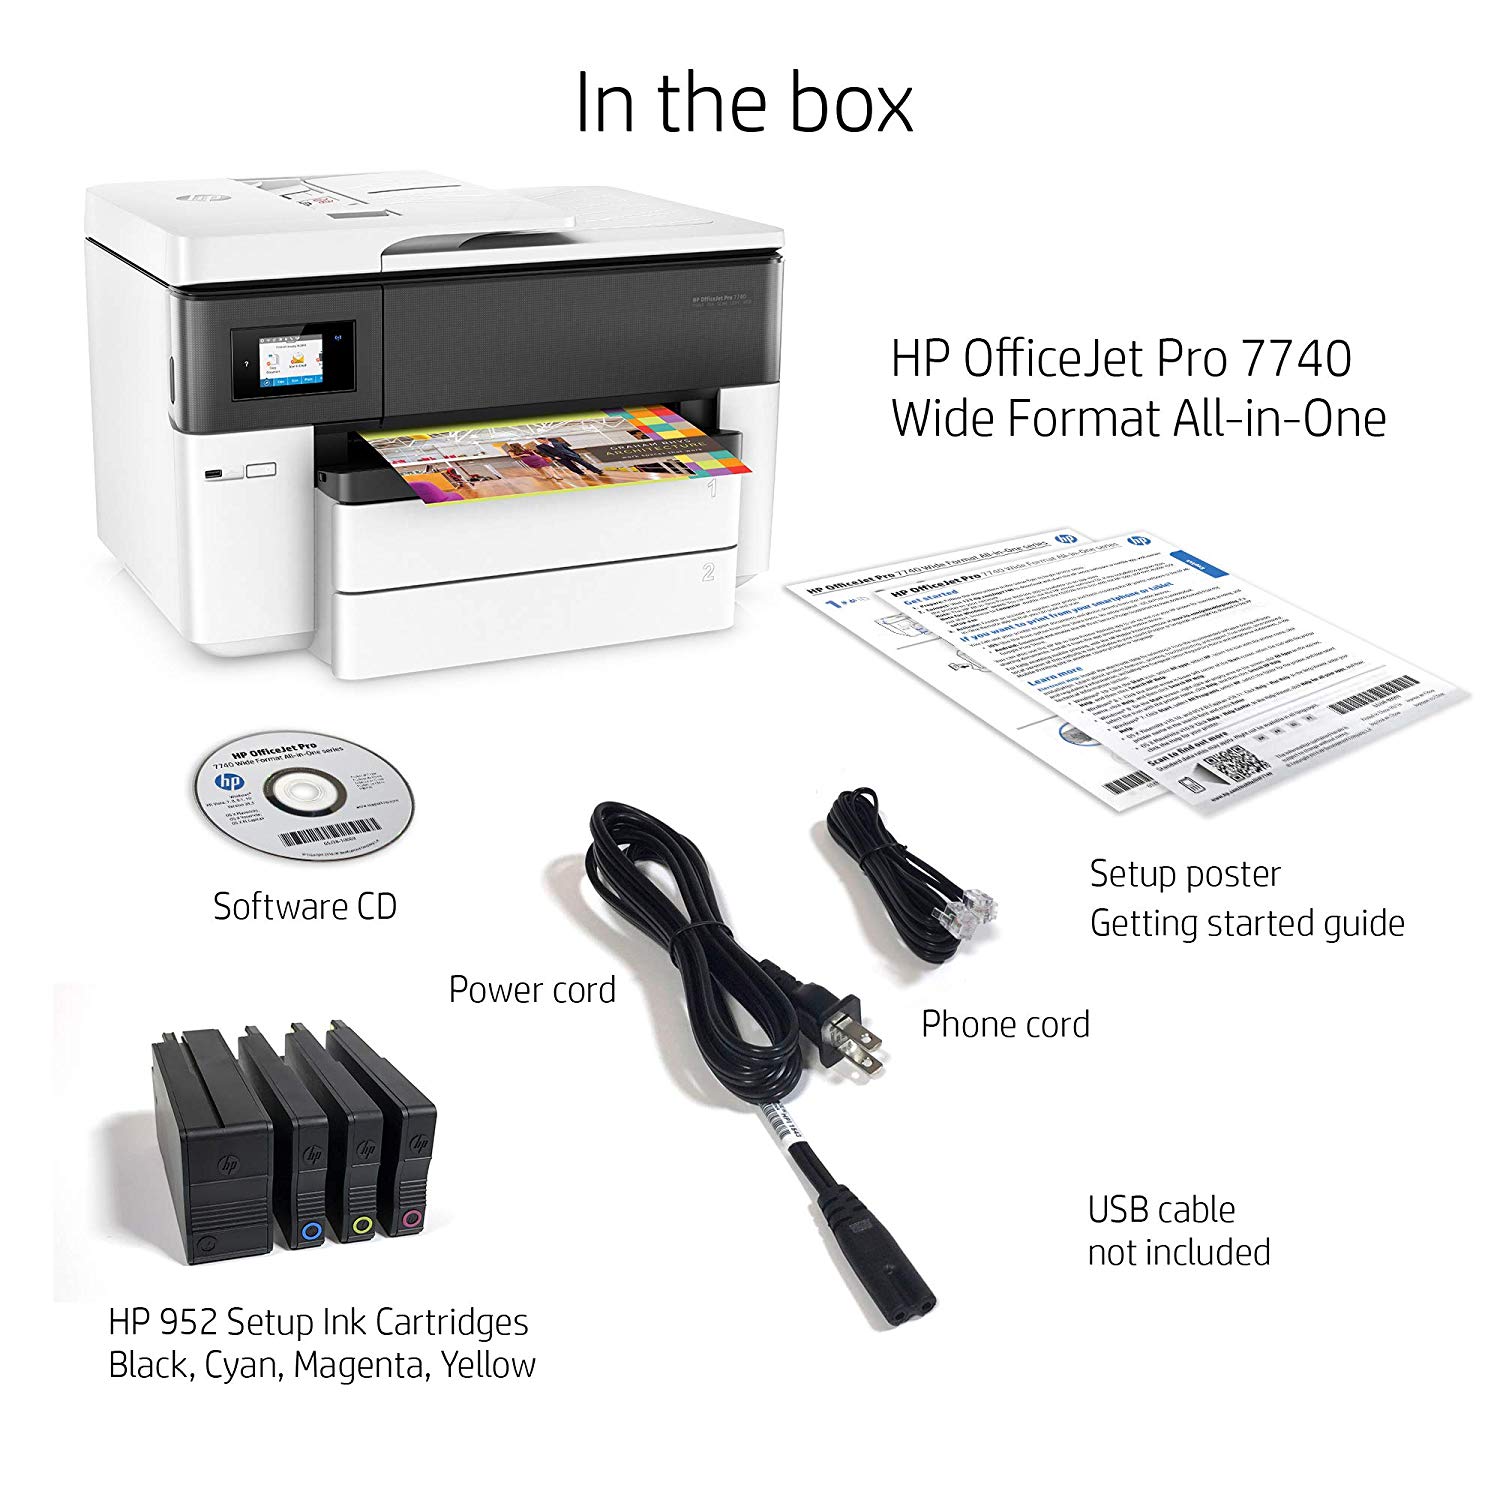 hp officejet pro 7740 software free download